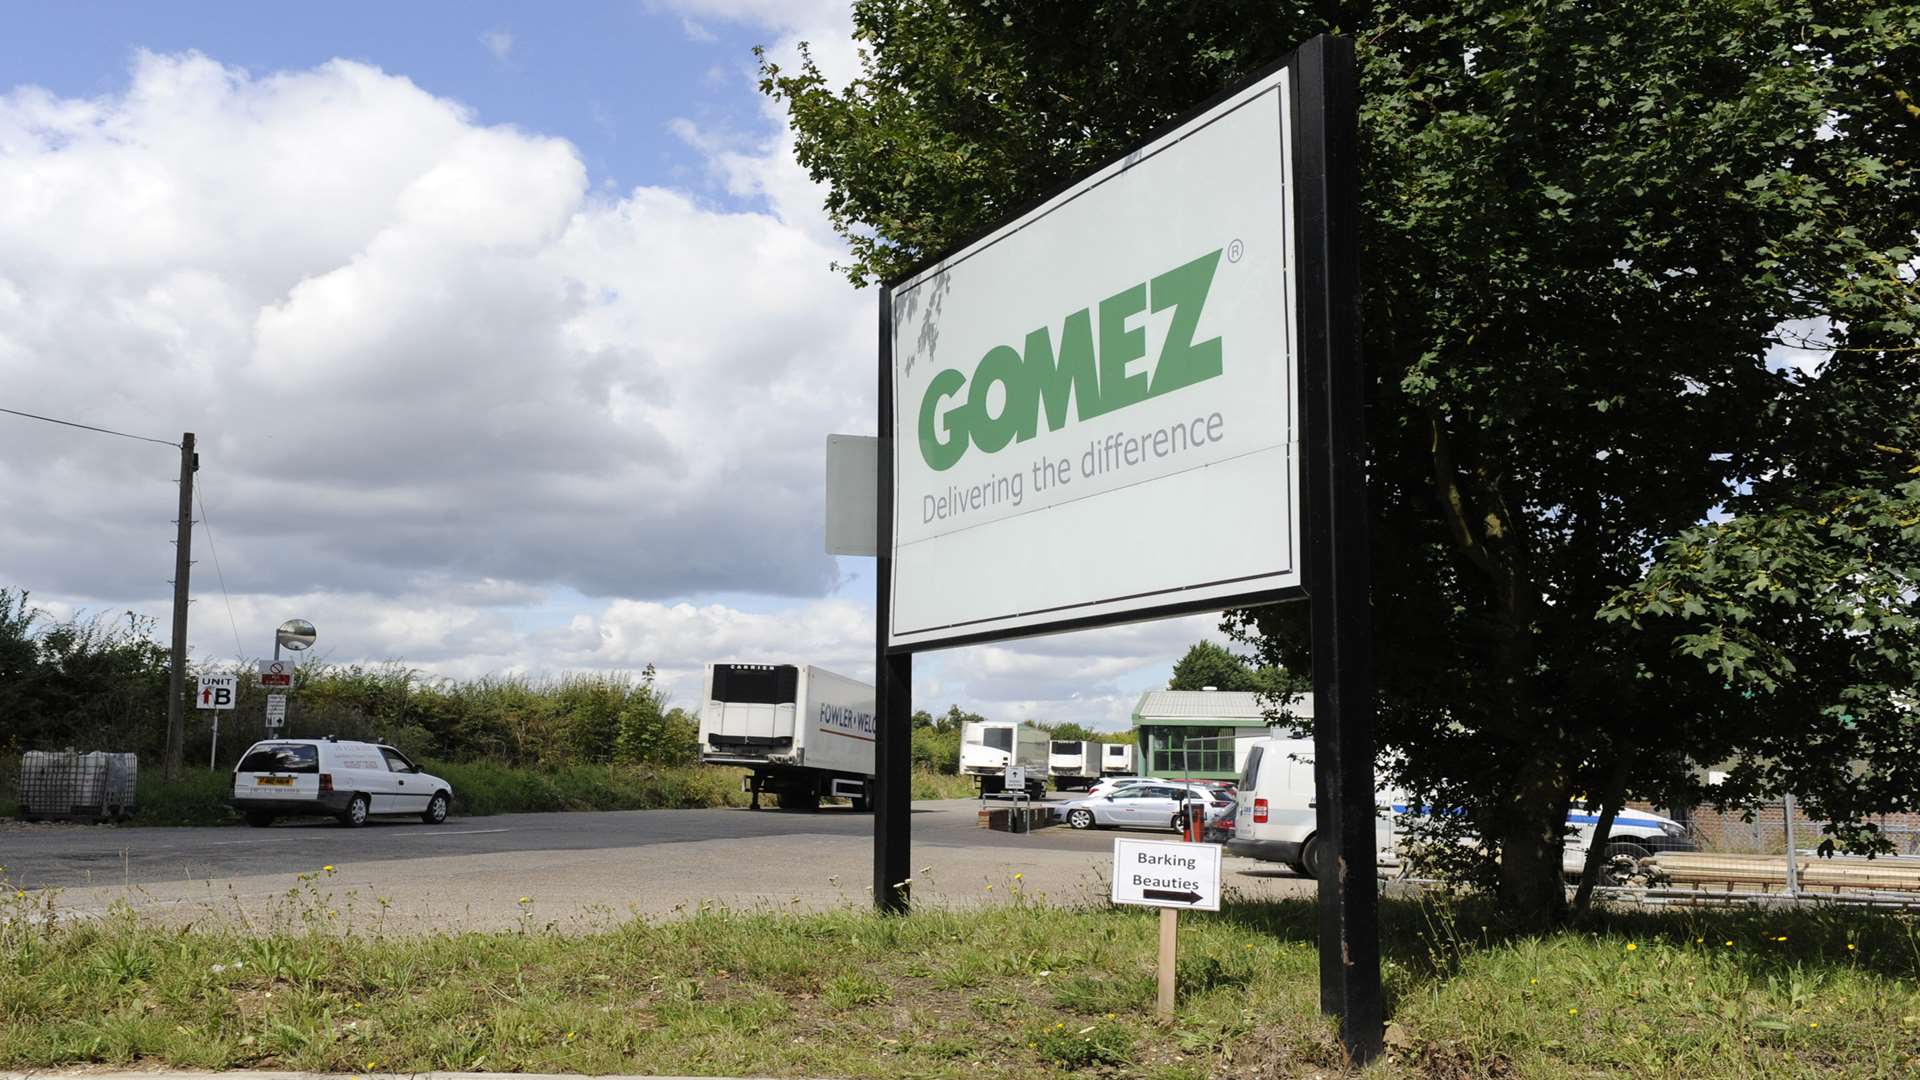 Gomez is the fastest-growing exporter in Kent